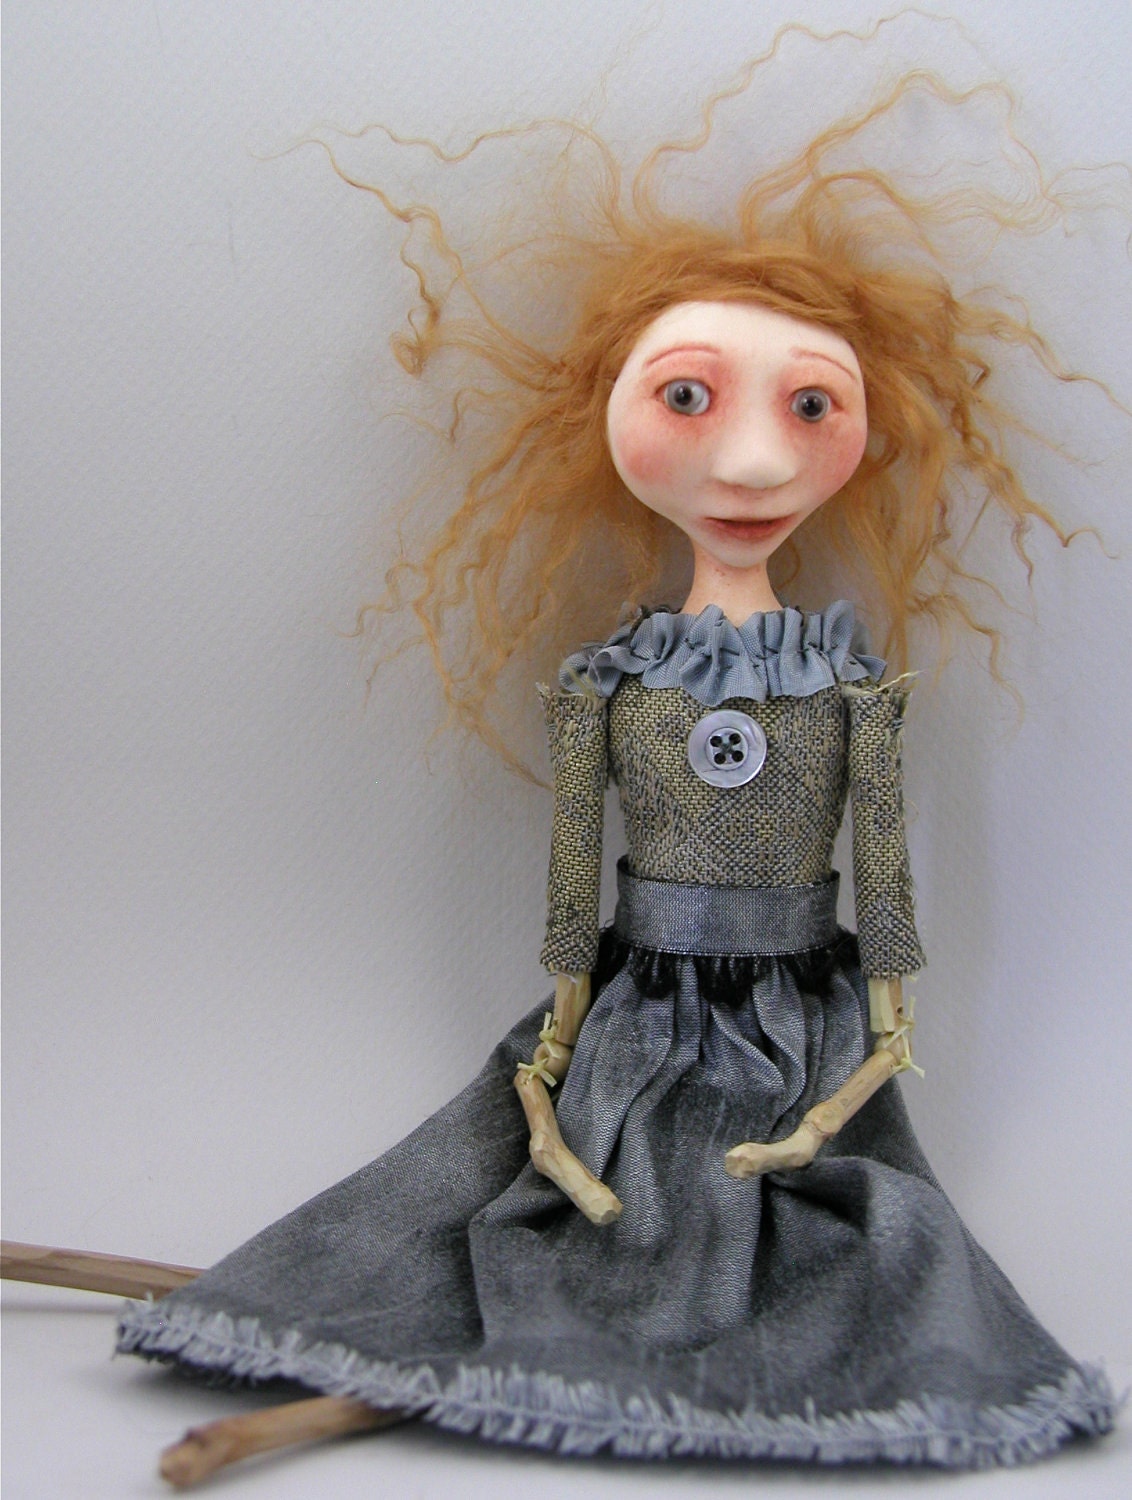 Folk Art doll sculpted cloth and clay strawberry blonde hair bead jointed limbs